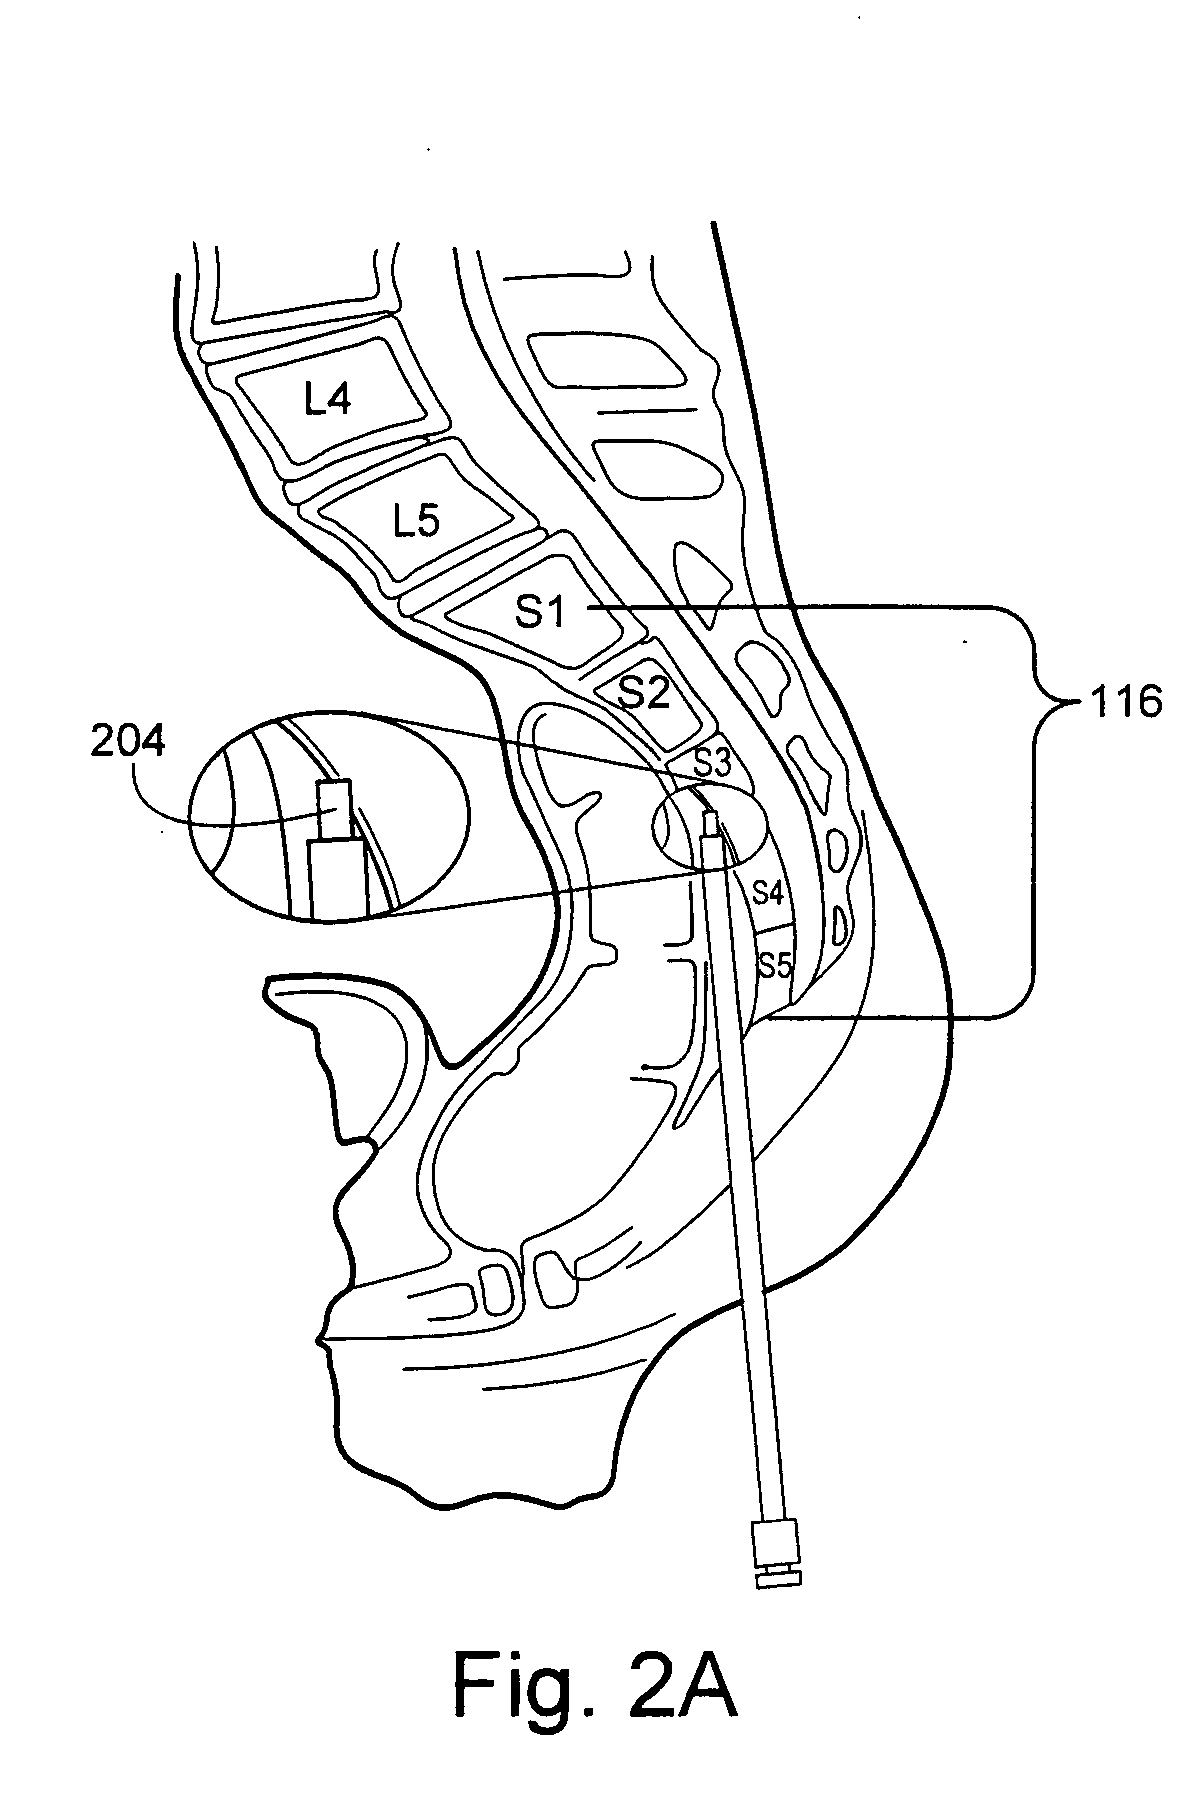 Methods and apparatus for provision of therapy to adjacent motion segments